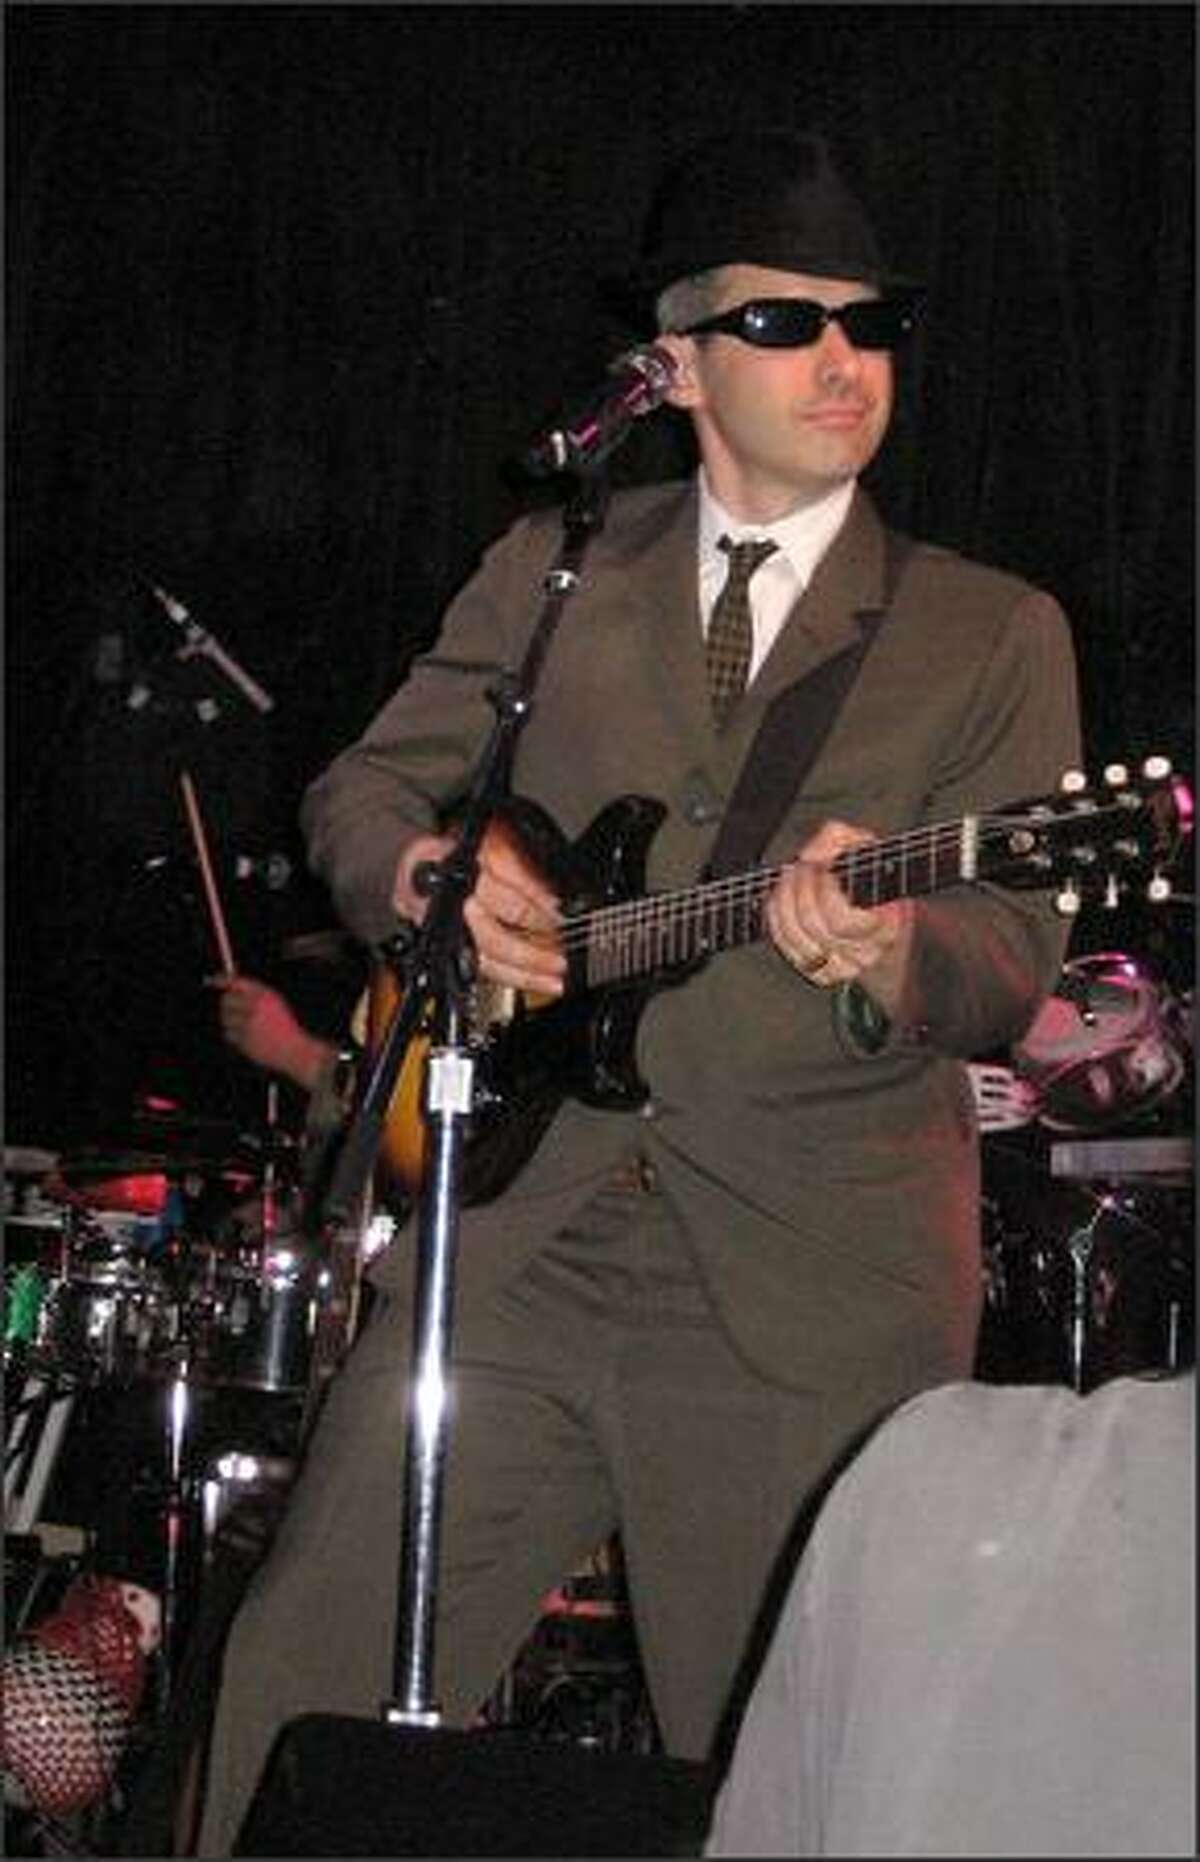 Beastie Boy Ad Rock looks cool while playing the guitar during an intimate show at the Crocodile Cafe on May 25, 2007.